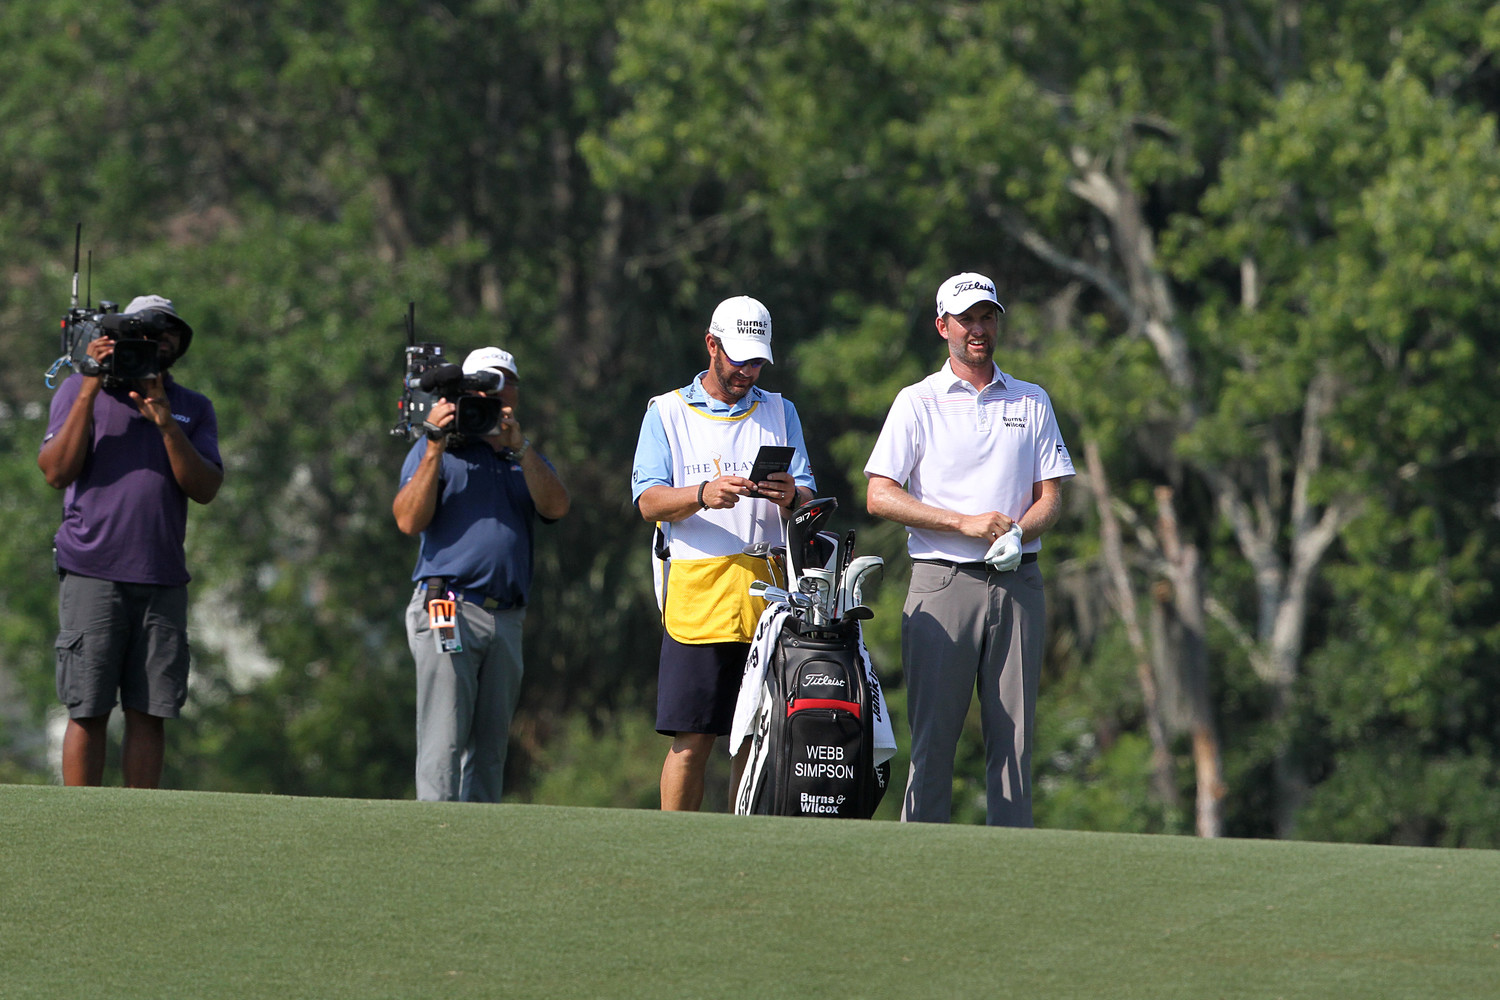 Paul Tesori, the caddie for THE PLAYERS Championship 2018 winner Webb Simpson and a Nocatee resident, surveys the field with Simpson during the final round of the tournament.